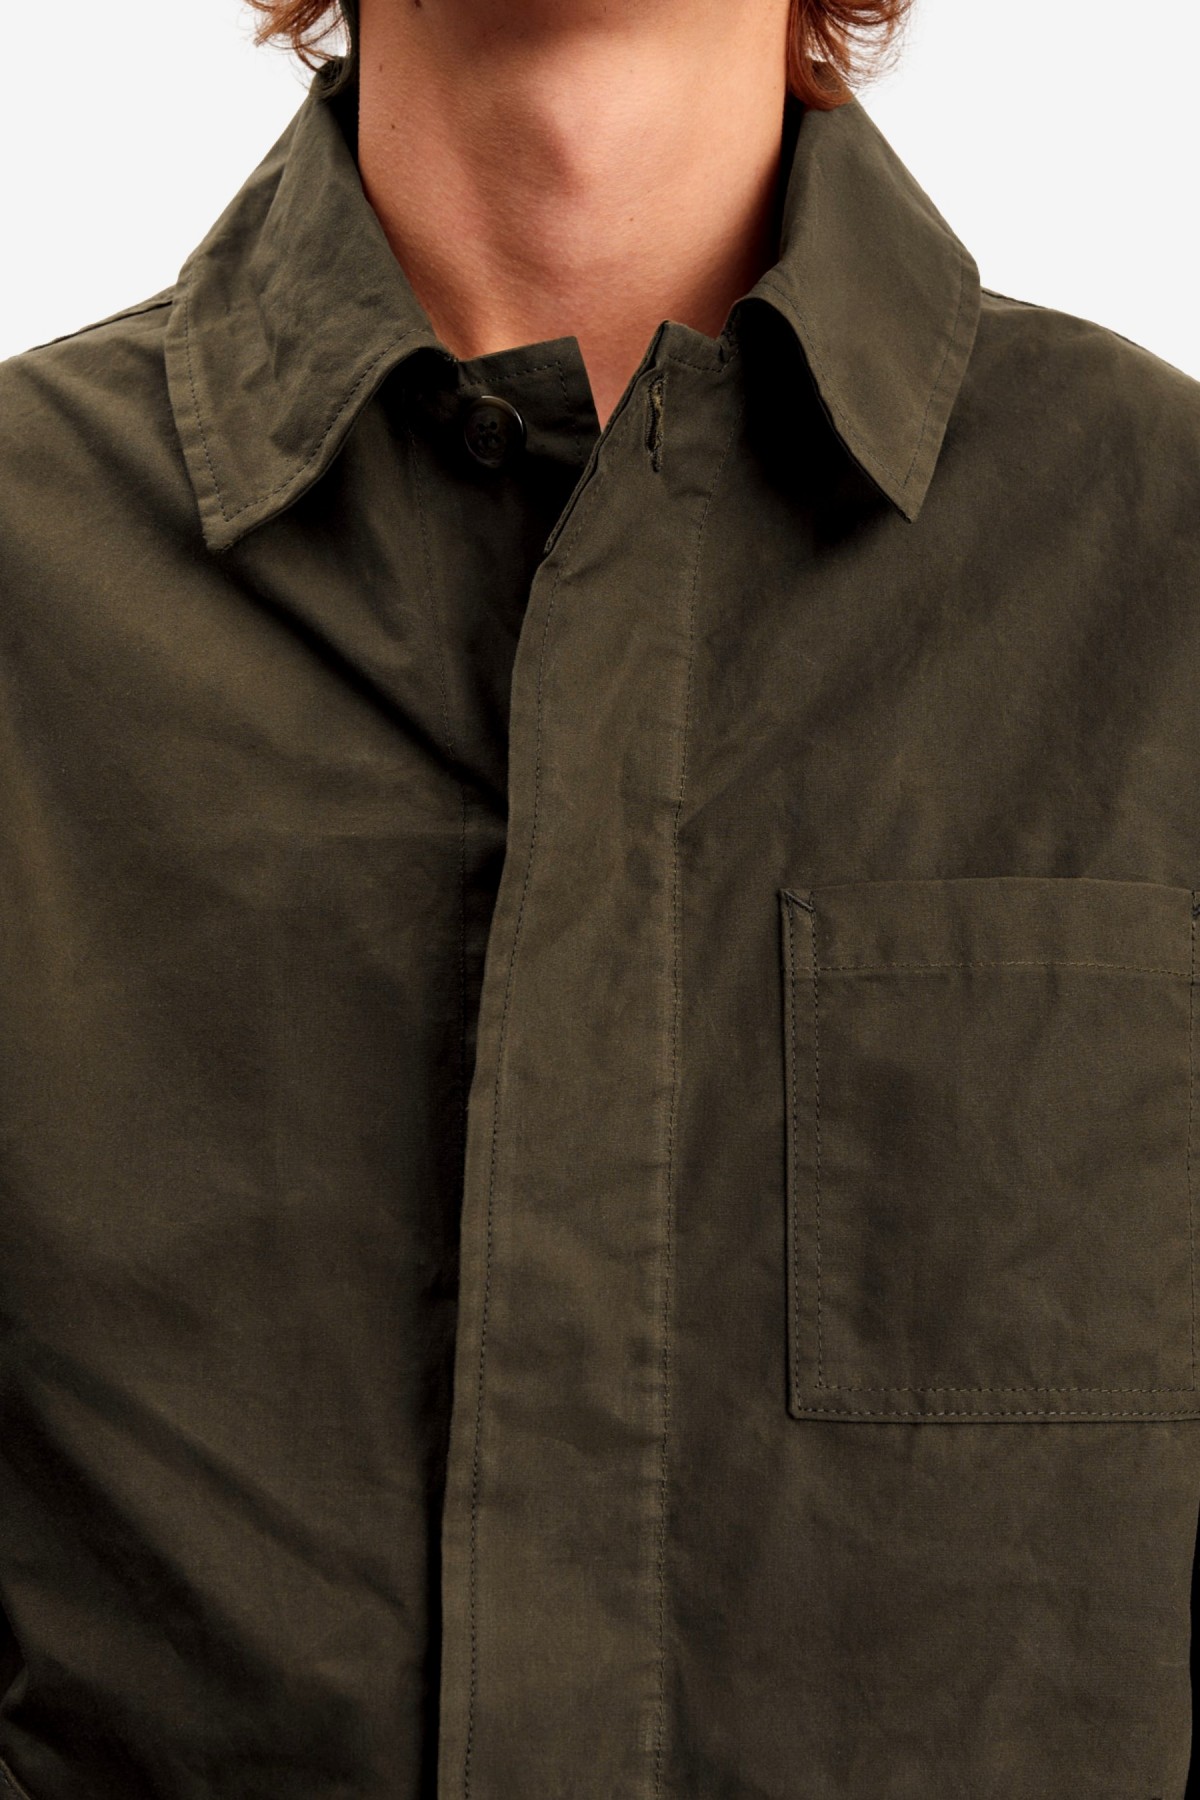 Another Aspect Overshirt 2.0 in Leaf